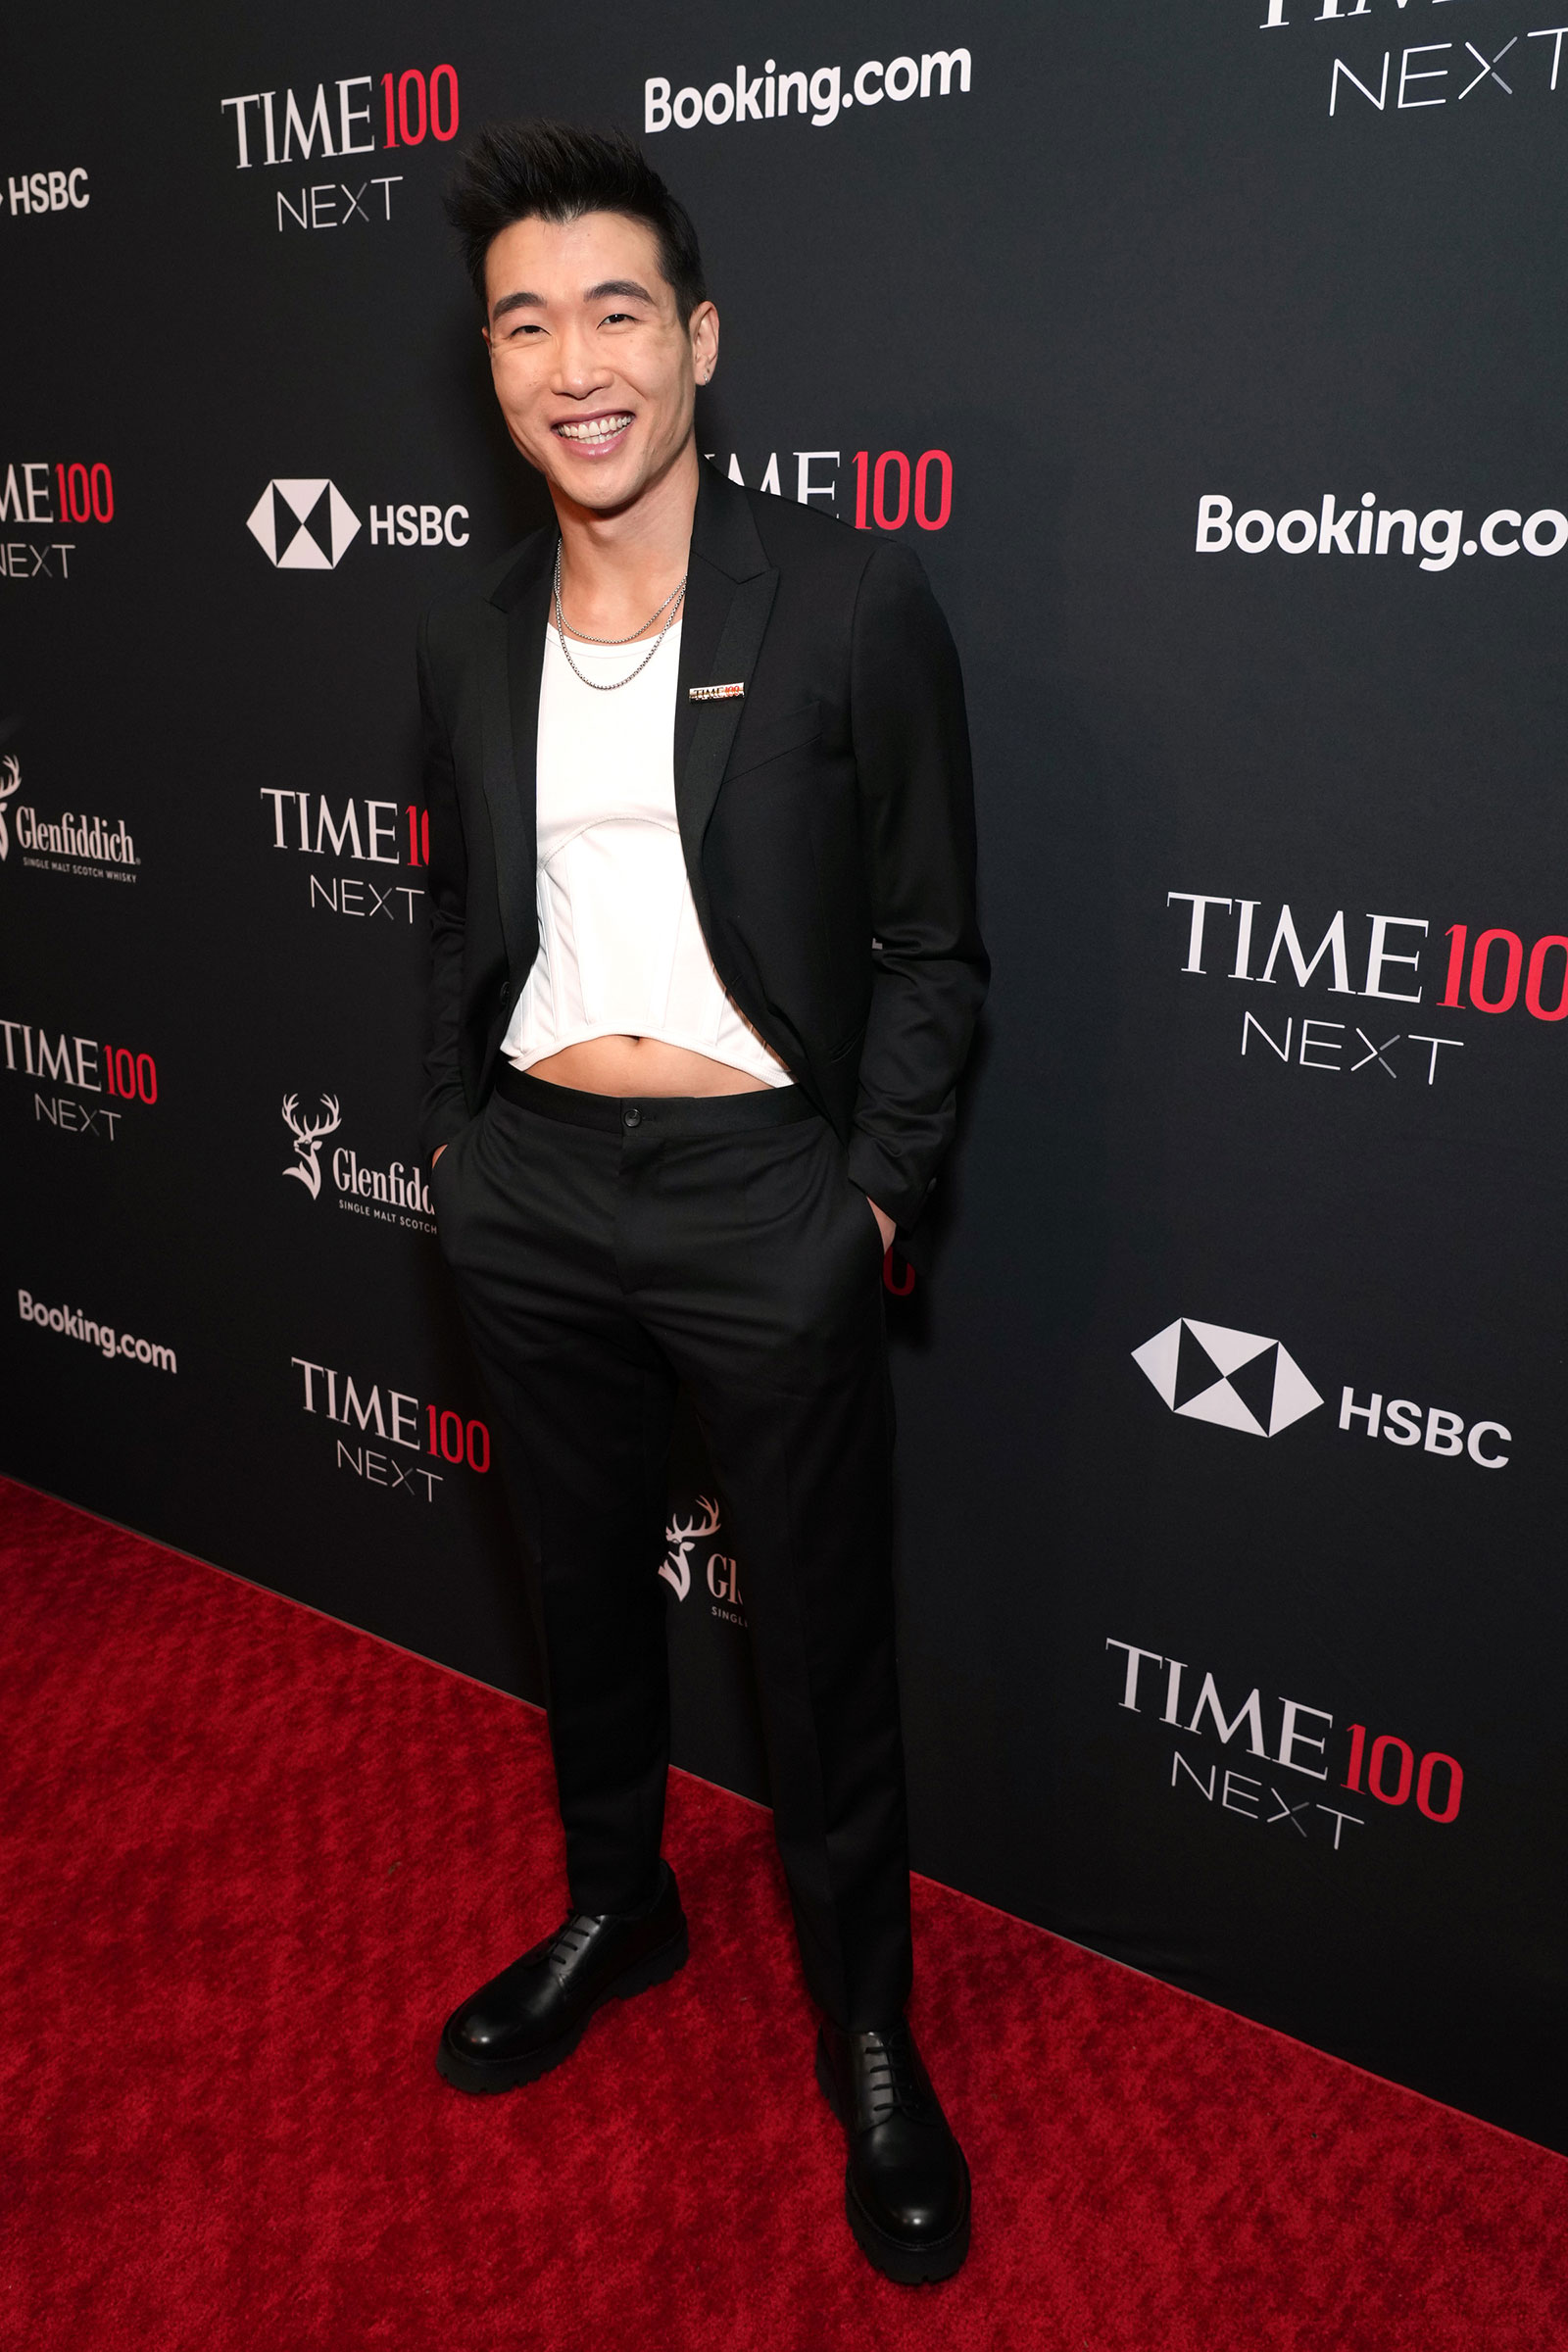 Actor and comedian Joel Kim Booster attends the TIME100 Next Gala in New York City. (Kevin Mazur—Getty Images for TIME)